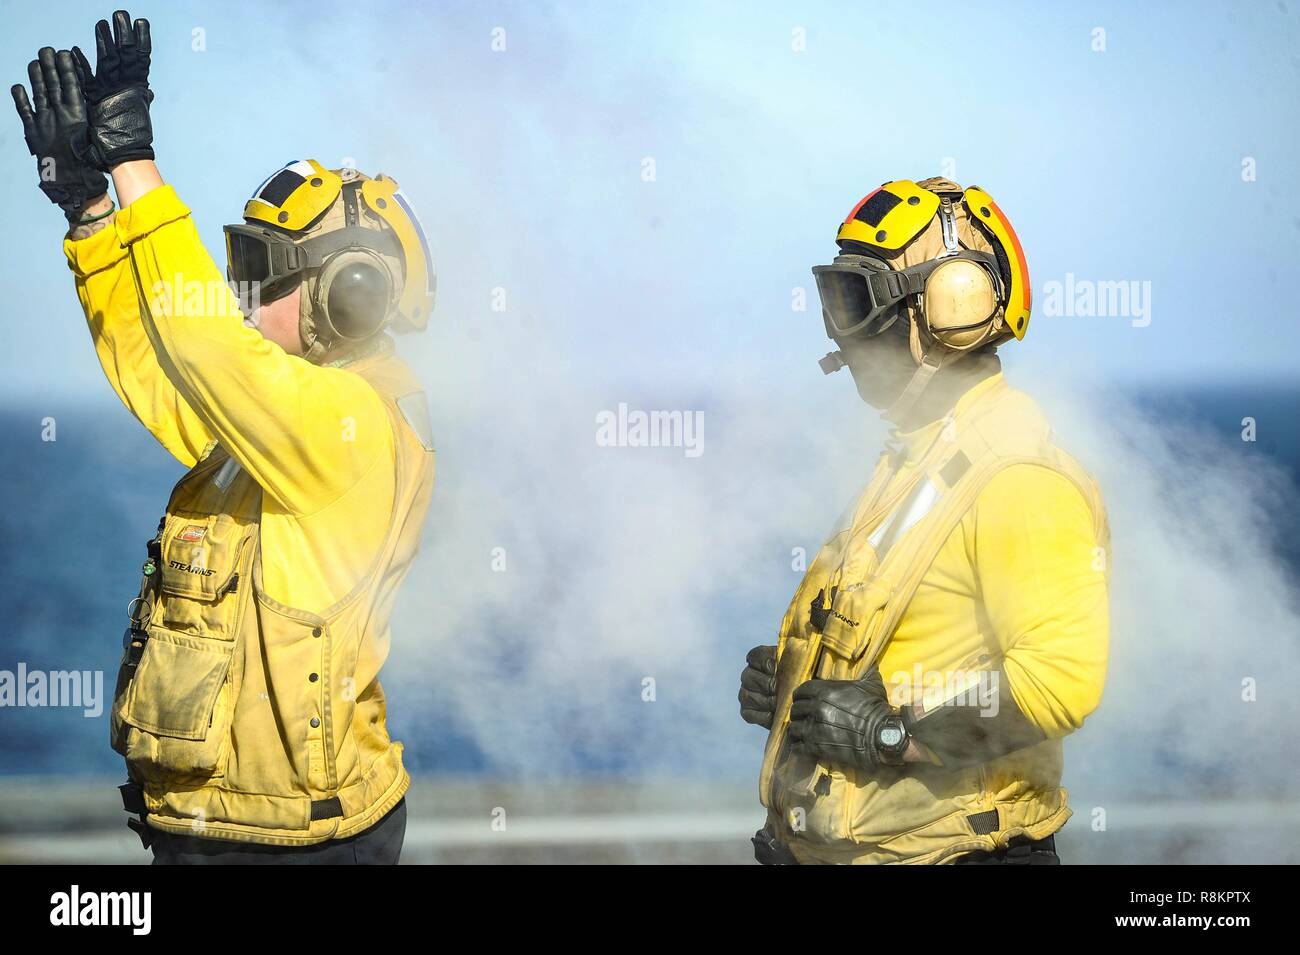 Flight directors known a yellow shirts coordinate flight deck operations aboard the Nimitz-class aircraft carrier USS Harry S. Truman December 7, 2018 in the Atlantic Ocean. Yellow shirts are worn by aircraft handlers, aircraft directors, Catapult Officers and Arresting Gear Officers considered the most difficult and important job on the flight deck. Stock Photo